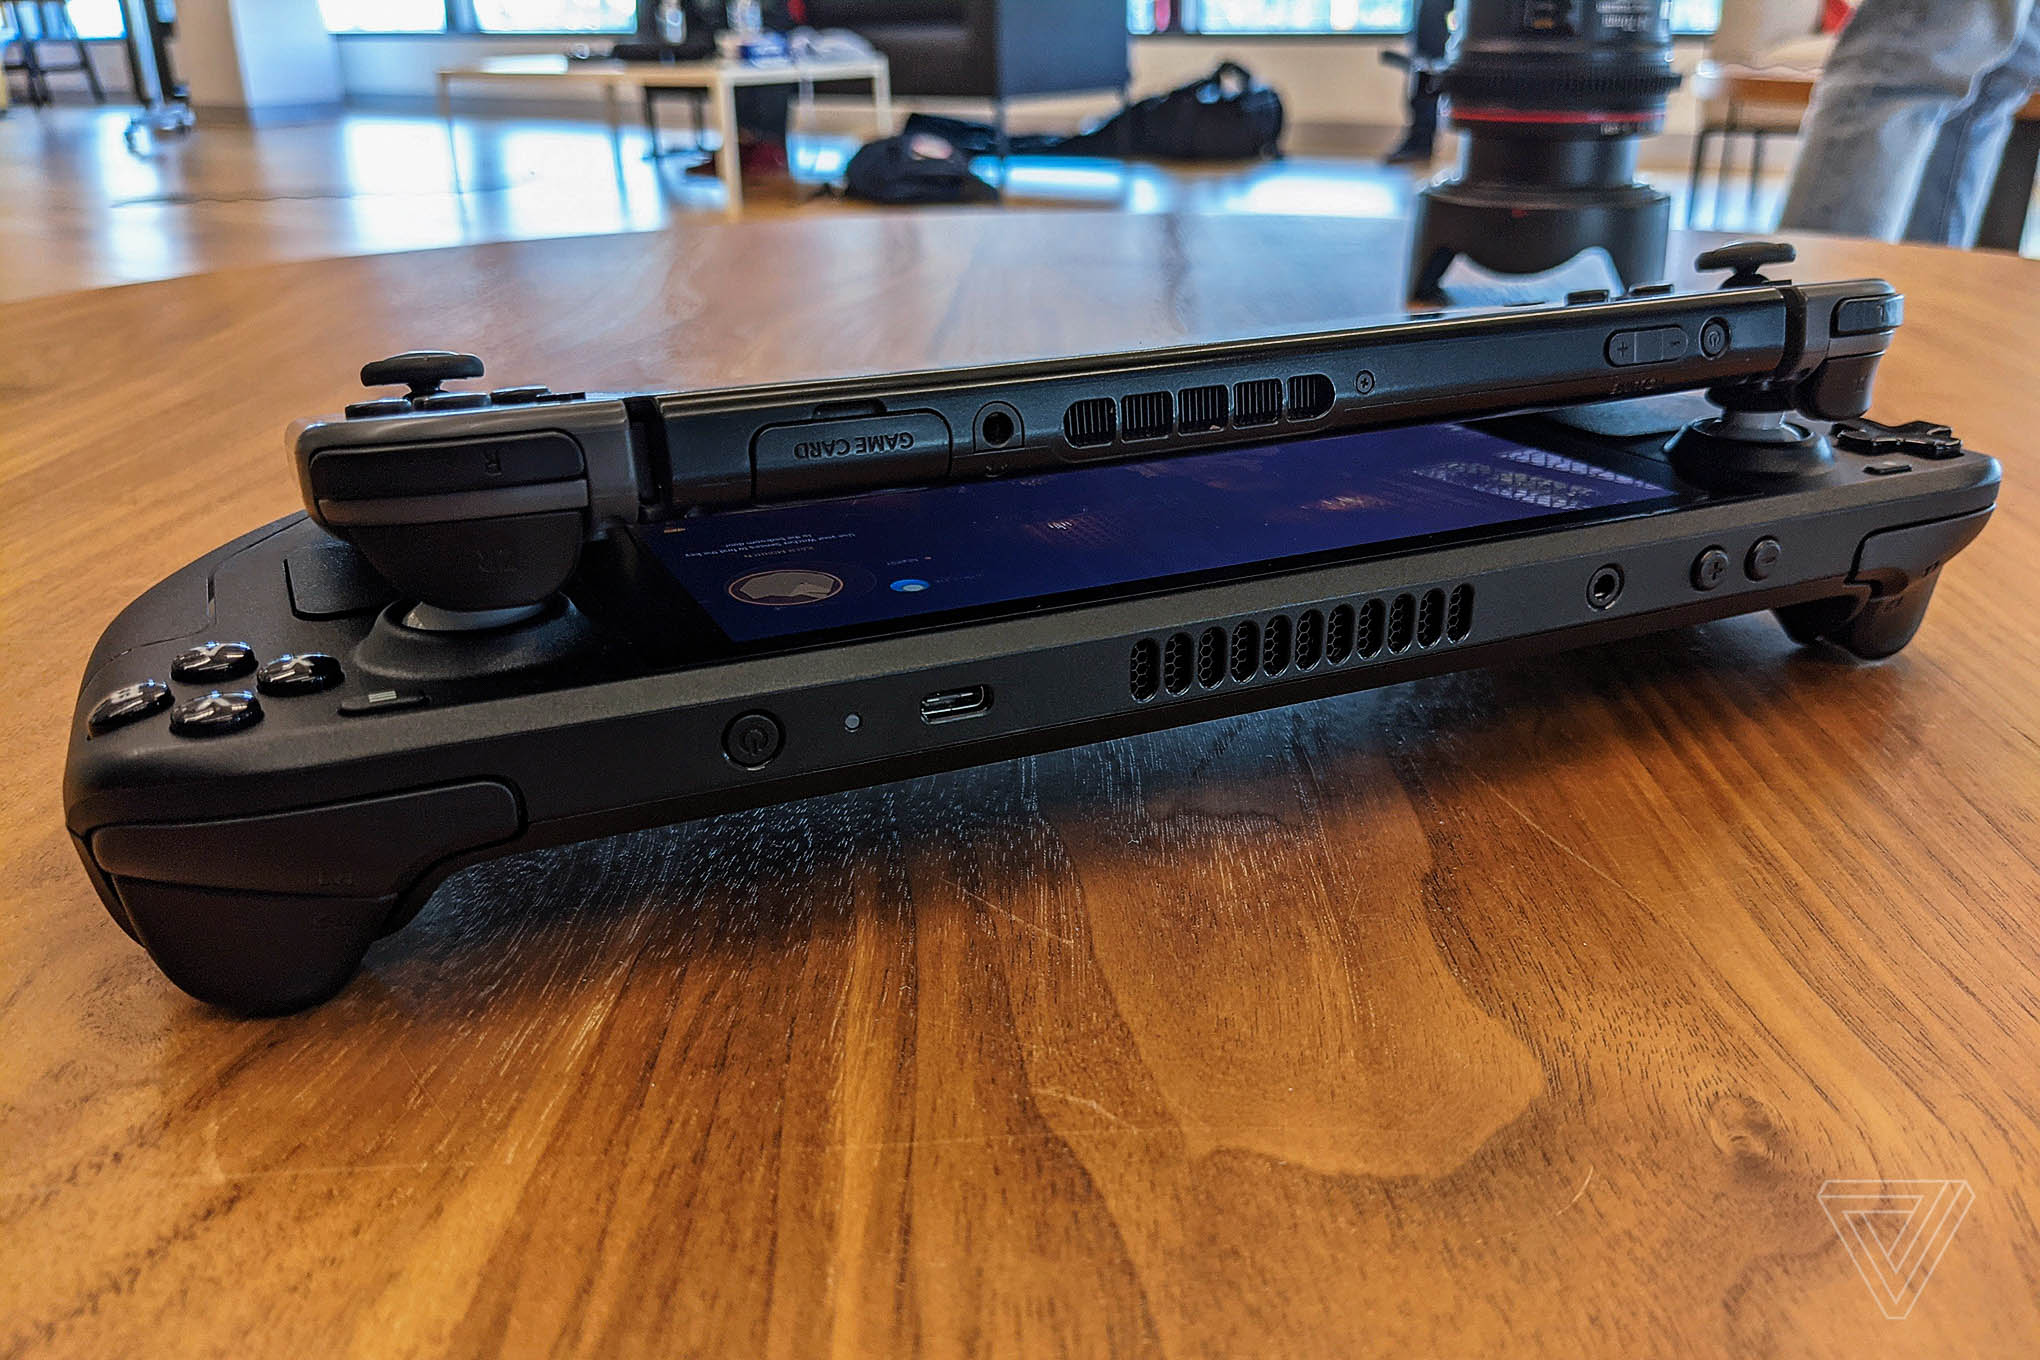 The Nintendo Switch atop a Steam Deck, showing its similar design and array of ports.